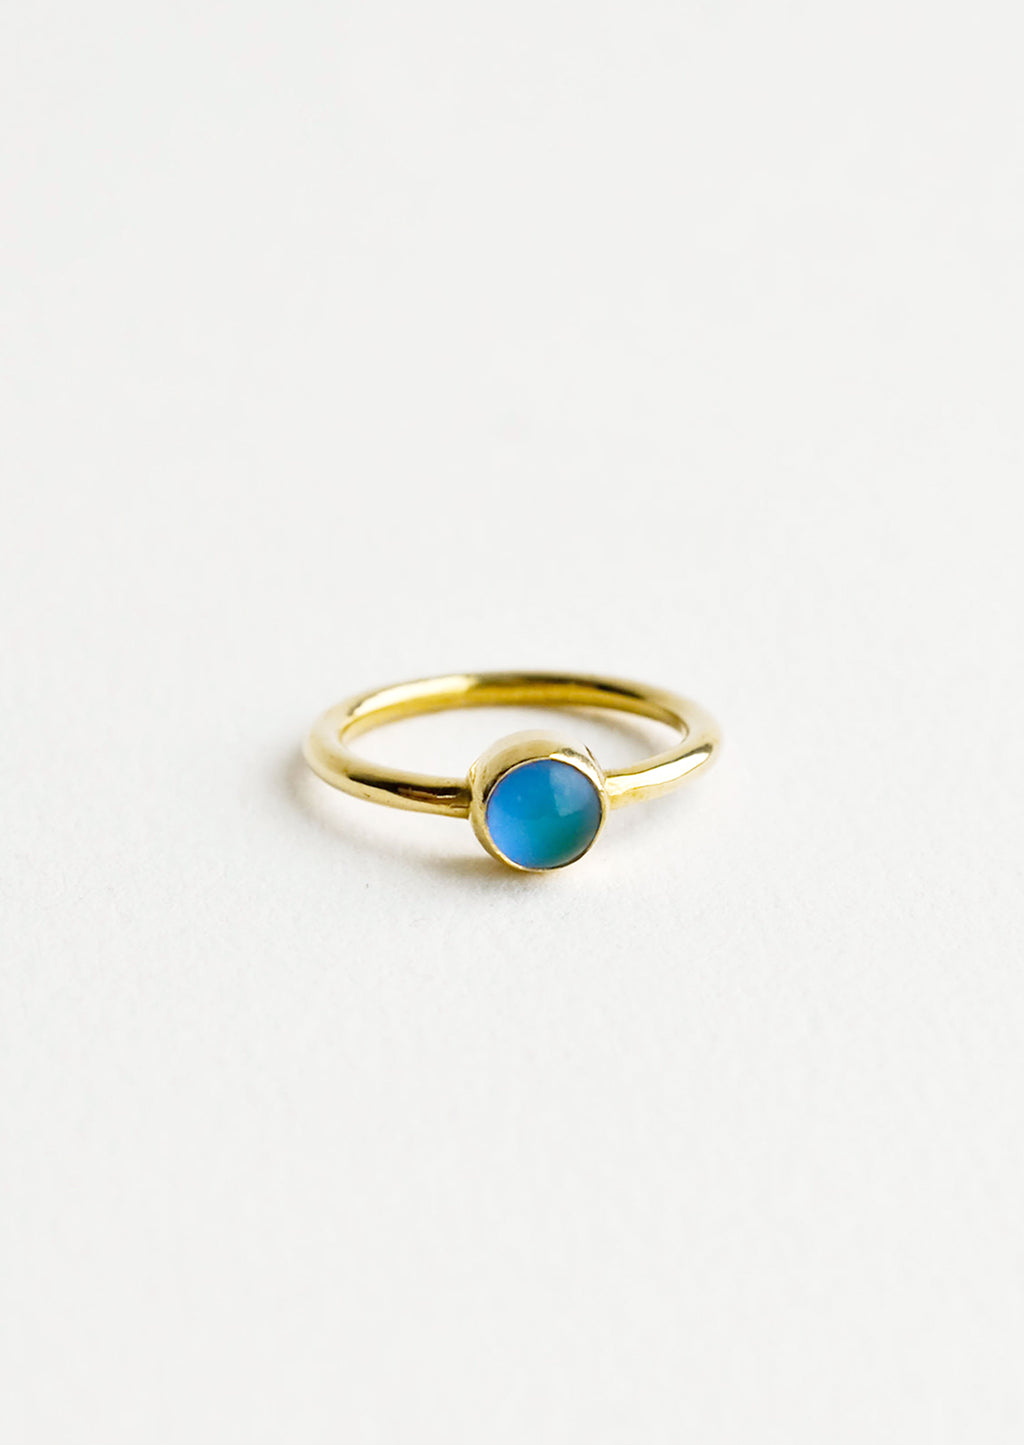 1: A gold ring with a round blue stone.